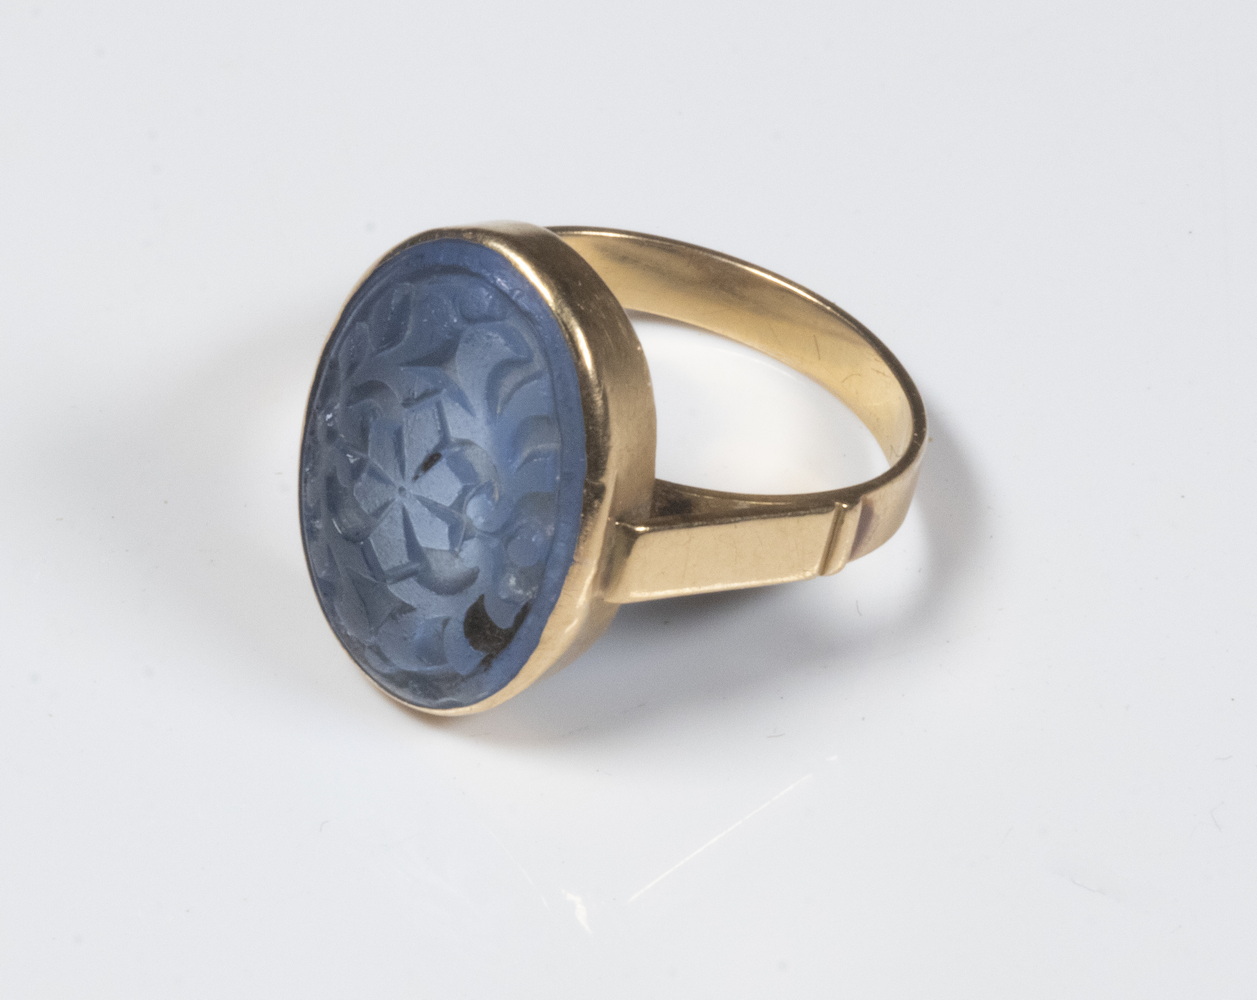 EARLY EGYPTIAN RING 18th c or 302b66